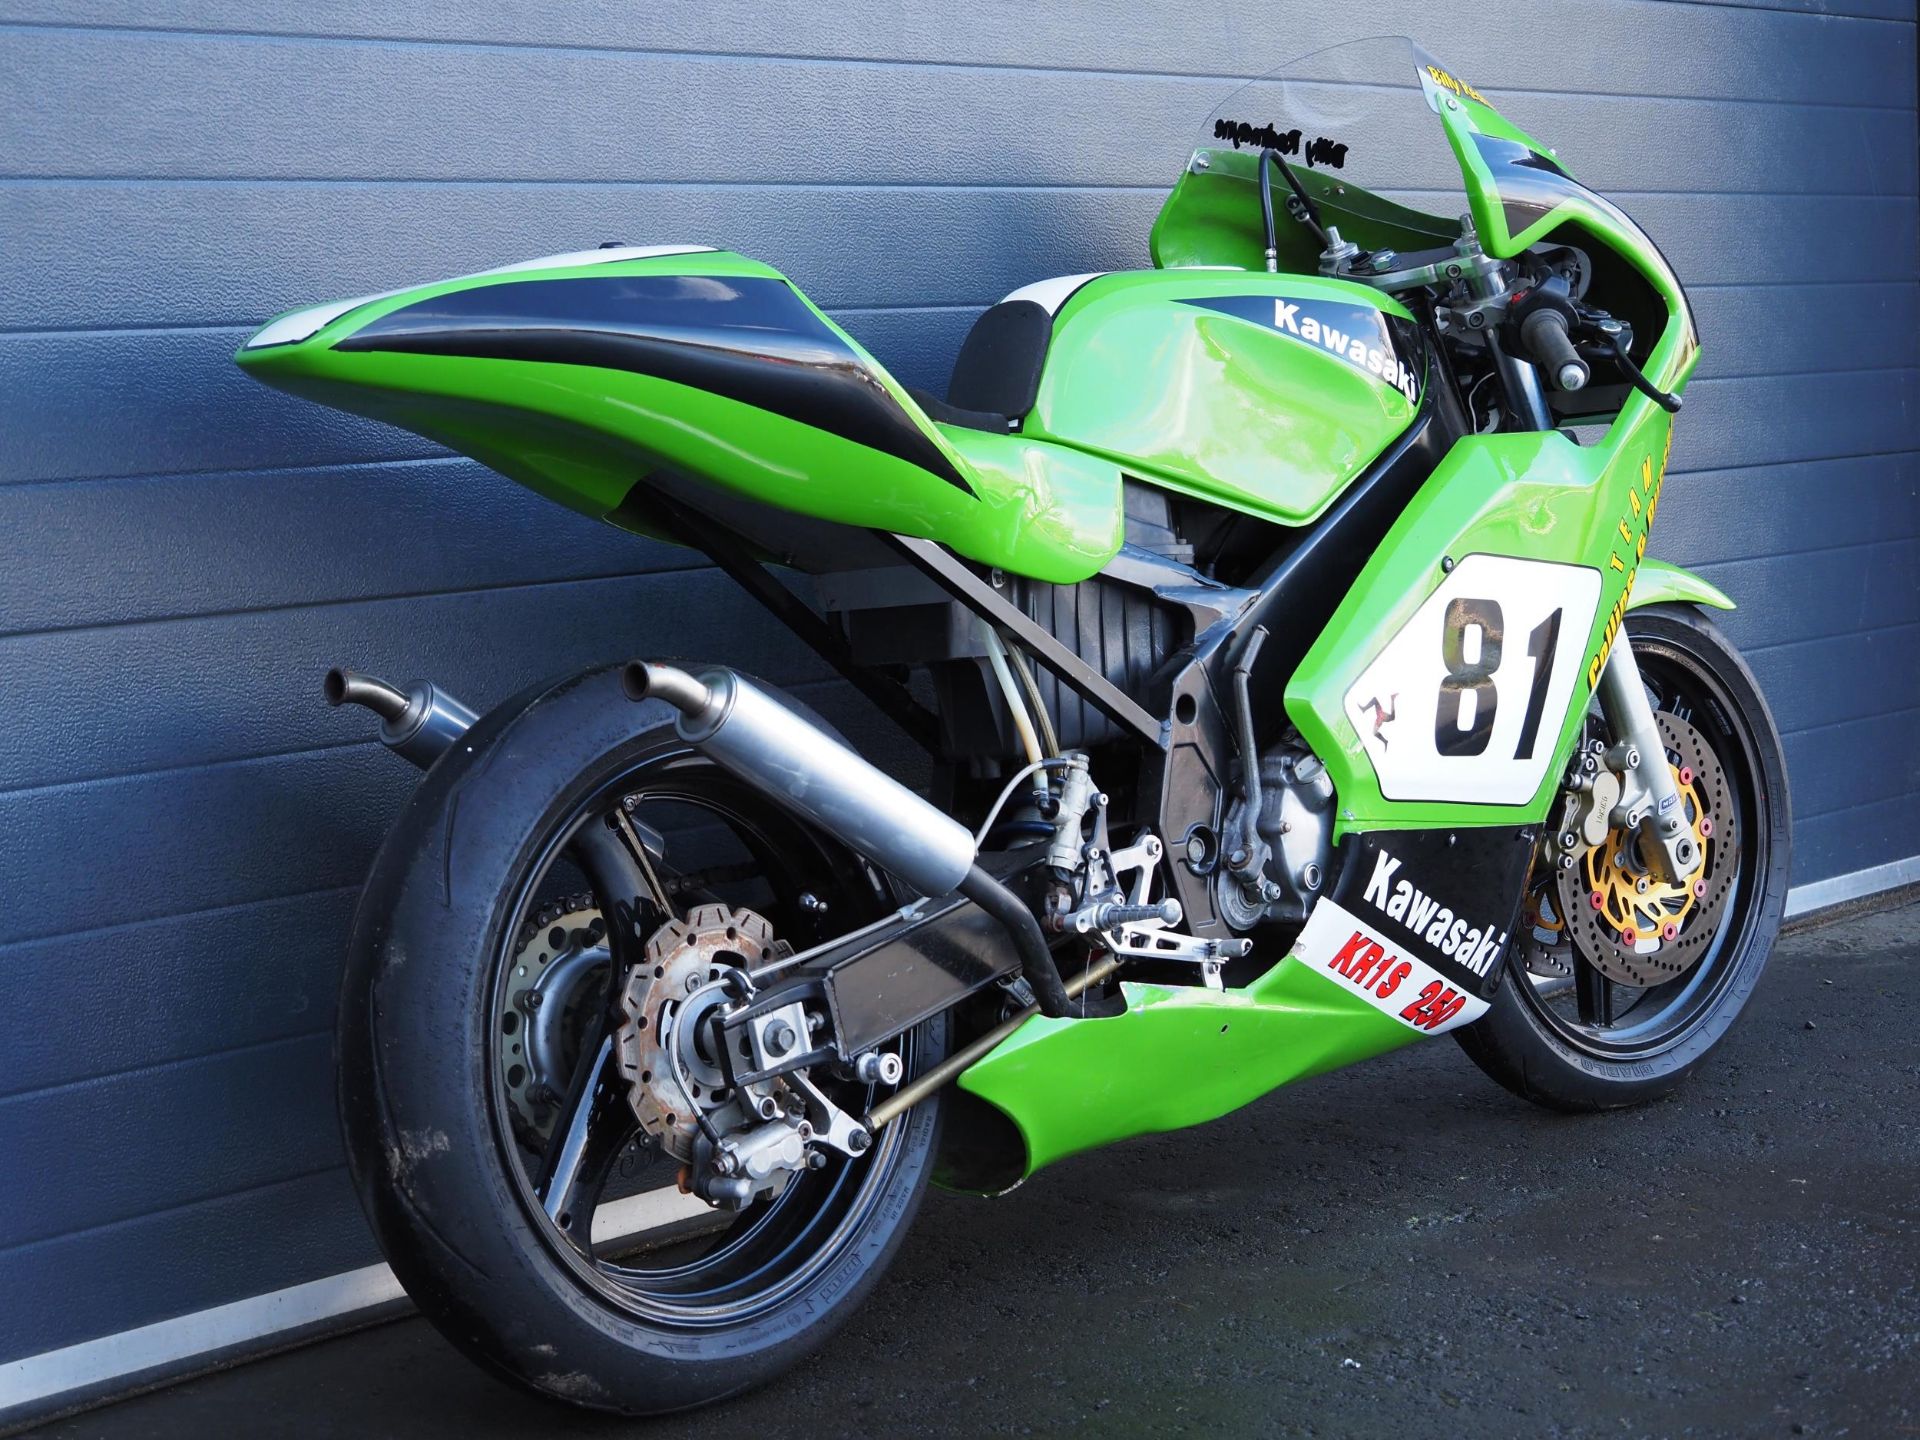 Kawasaki KR1-S 250 F2 motorcycle. 1992 This bike was ridden by Billy Redmayne at the 2015 Classic F2 - Image 4 of 8